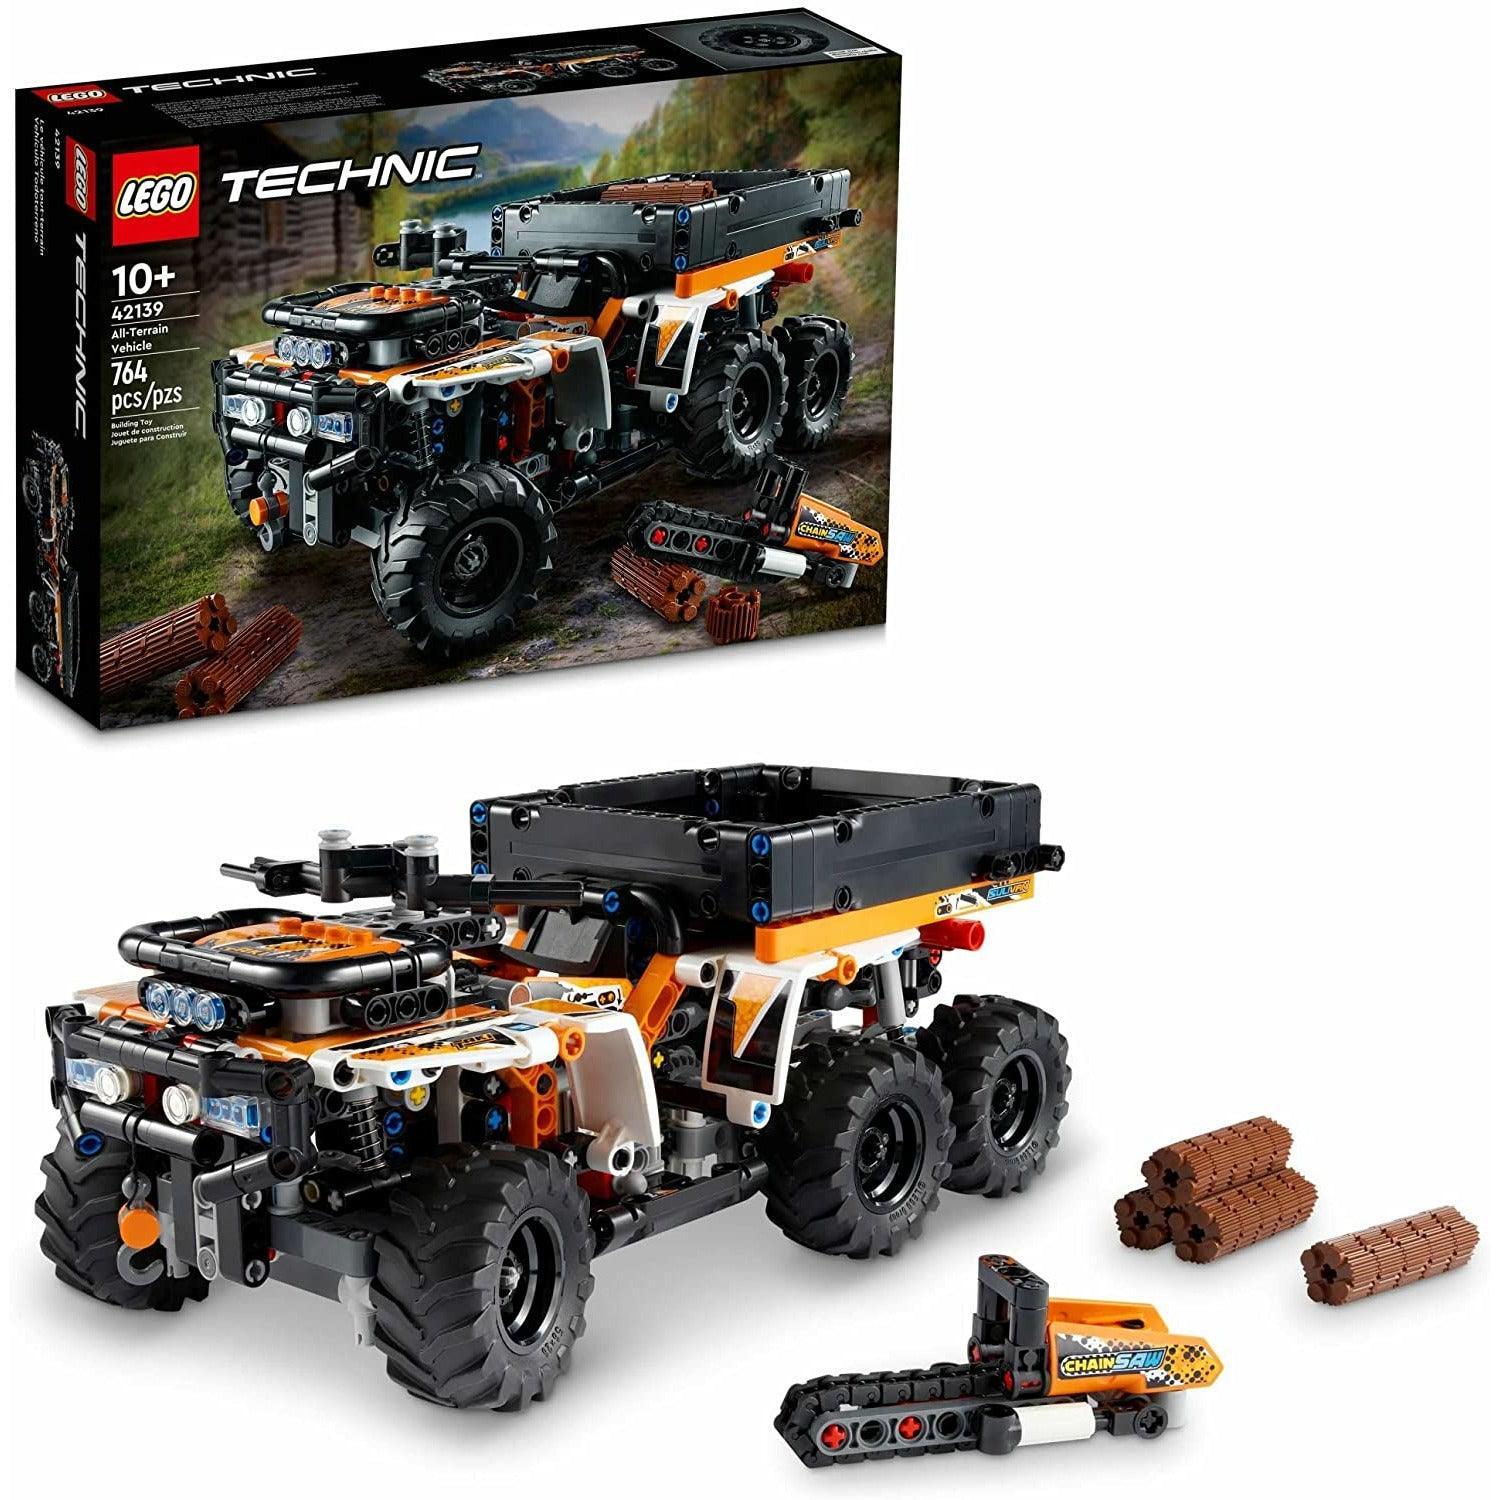 LEGO Technic All-Terrain Vehicle 42139 Model Building Kit; Build and Explore a Detailed ATV Model; Packed with Features and Accessories for Role-Play Fun; for Ages 10+ (764 Pieces) - BumbleToys - 8+ Years, 8-13 Years, Boys, LEGO, Monster Jam, OXE, Pre-Order, Technic